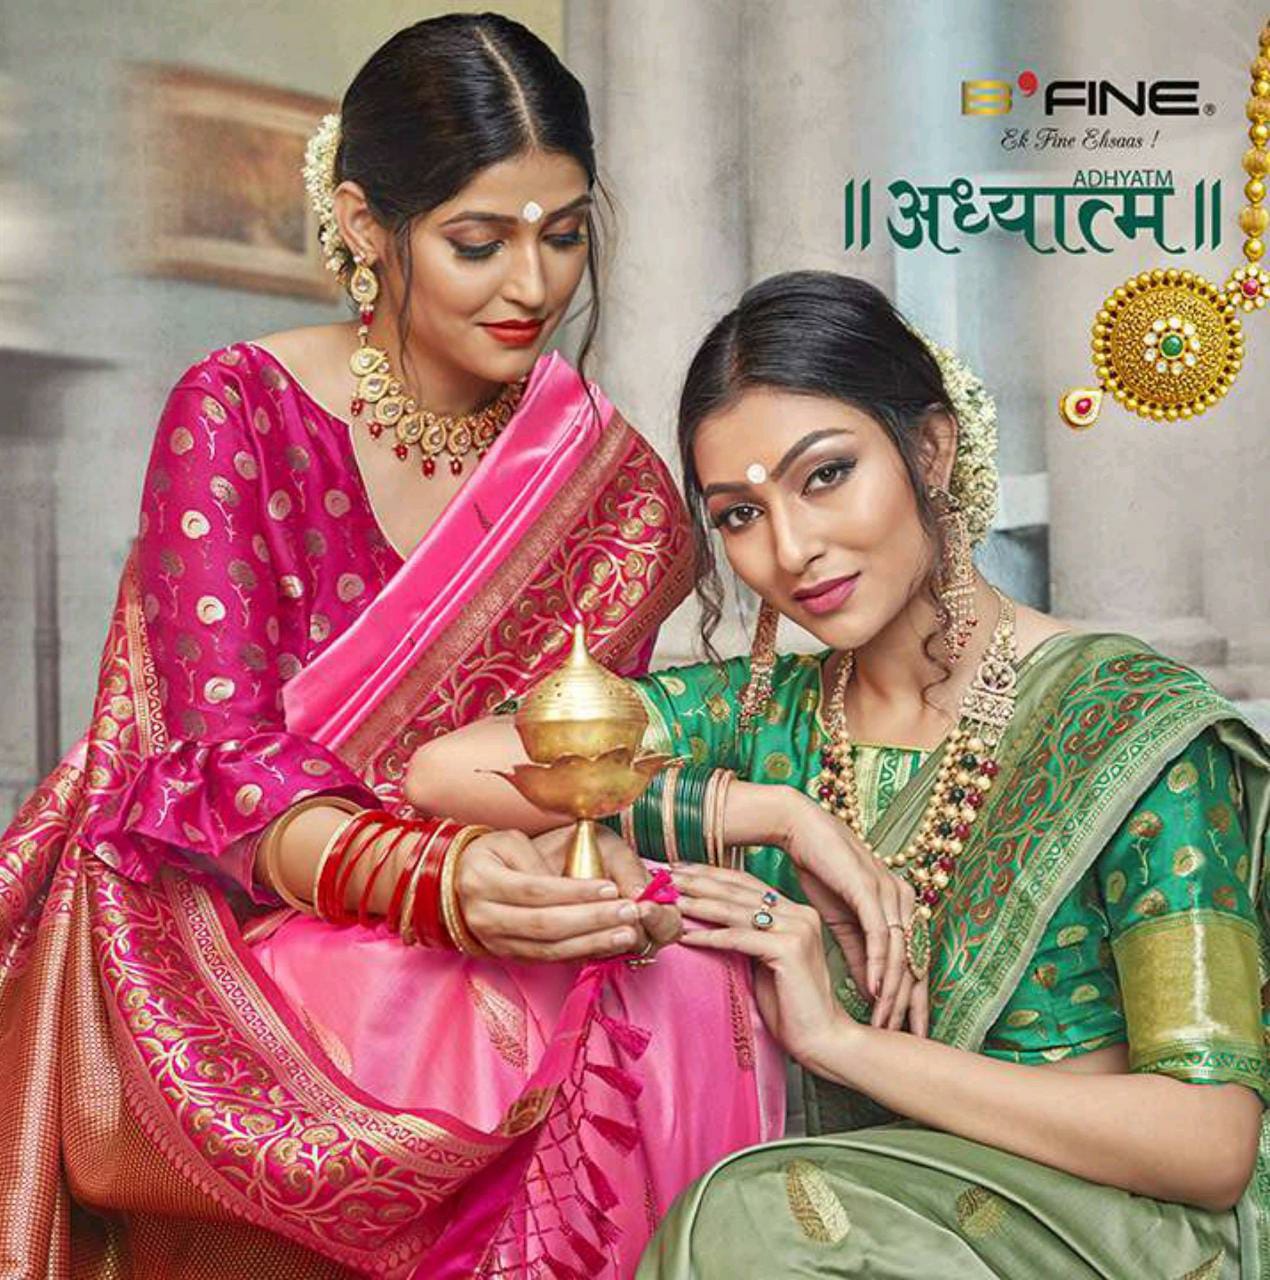 B Fine Adhyatm Silk Party Wear Heavy Sarees Collection At Wh...